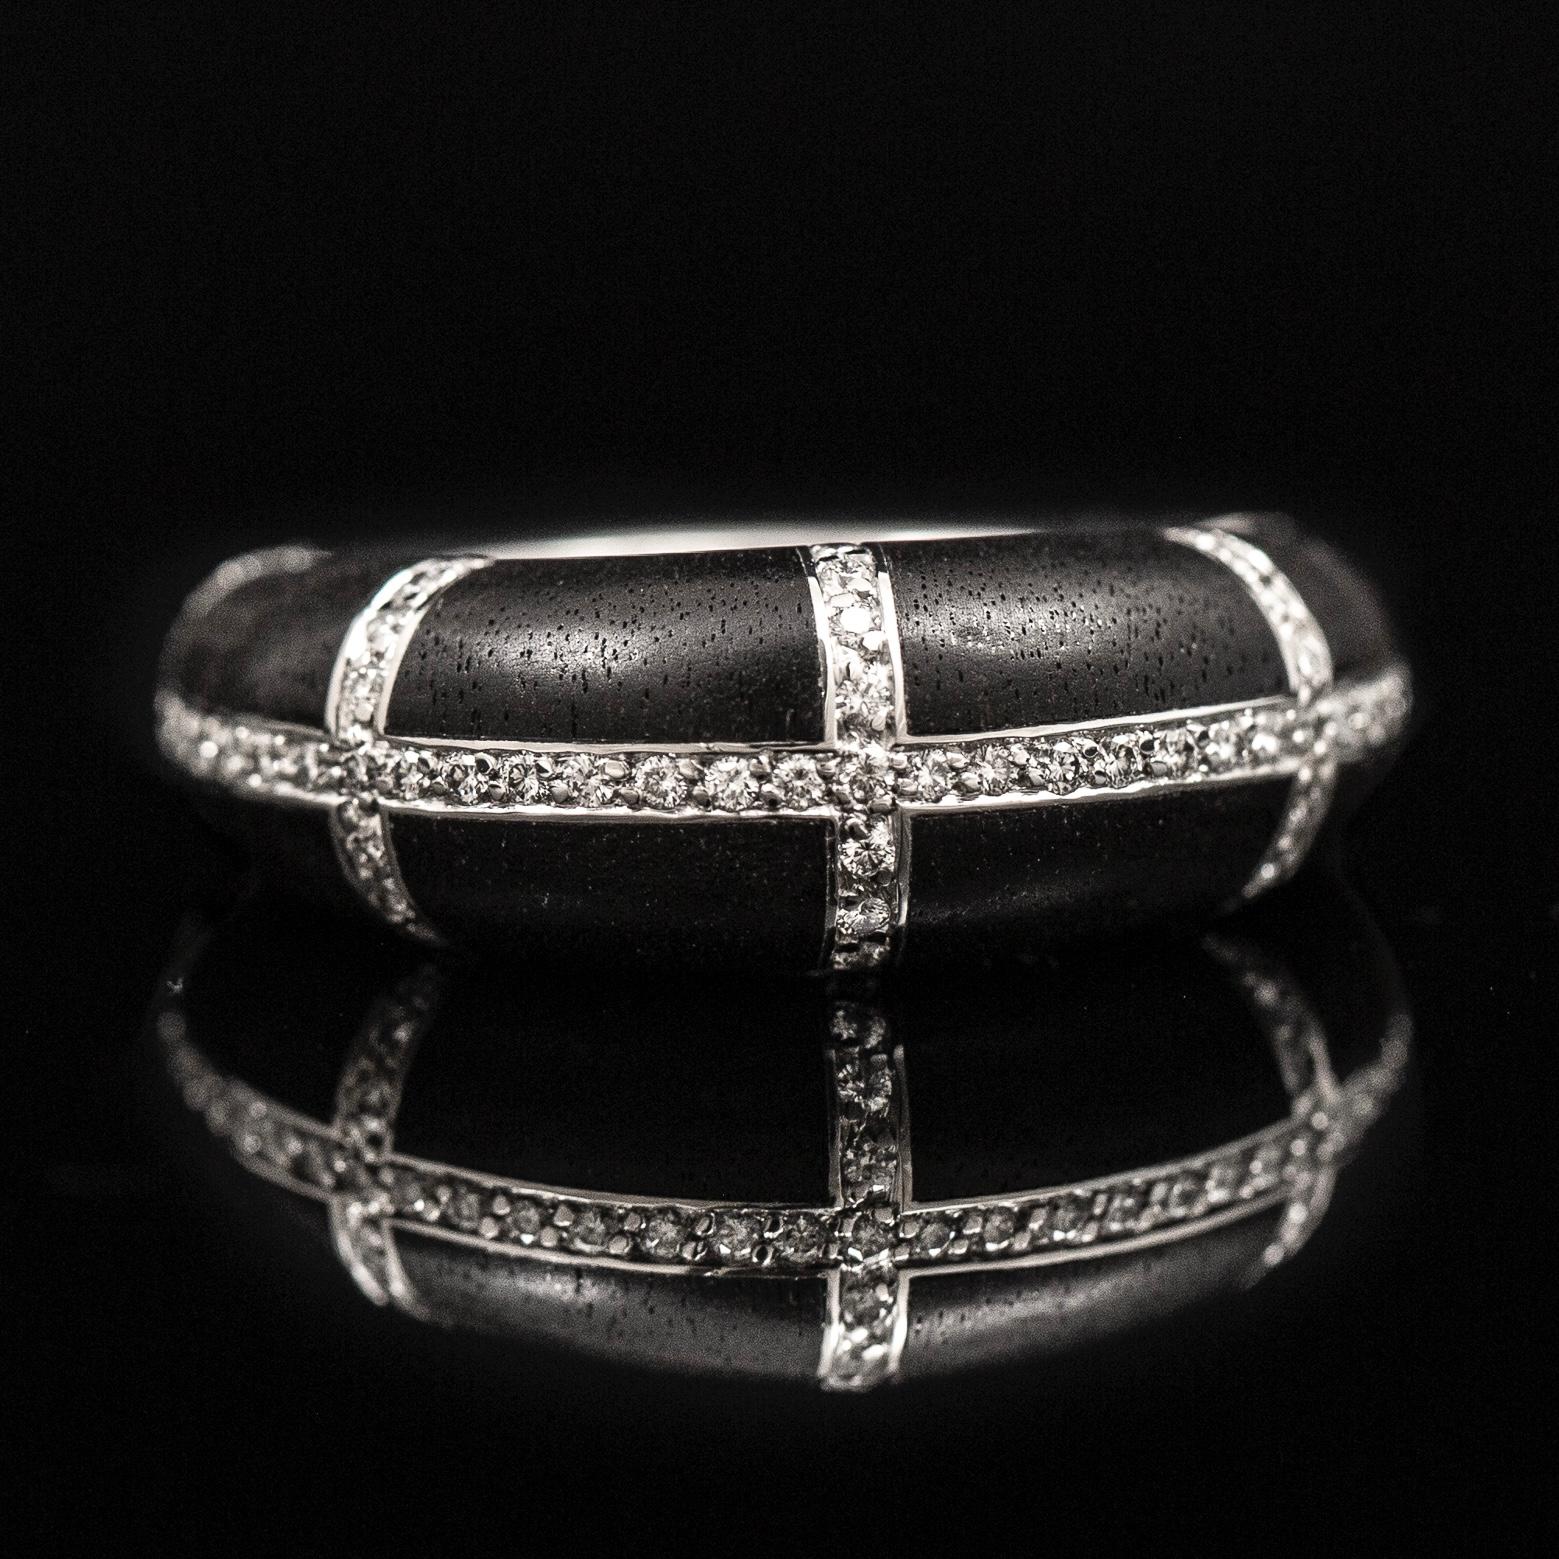 Modern Chaumet Anneau Diamond Black Ebony Cocktail Ring 18k White Gold French 1990s For Sale